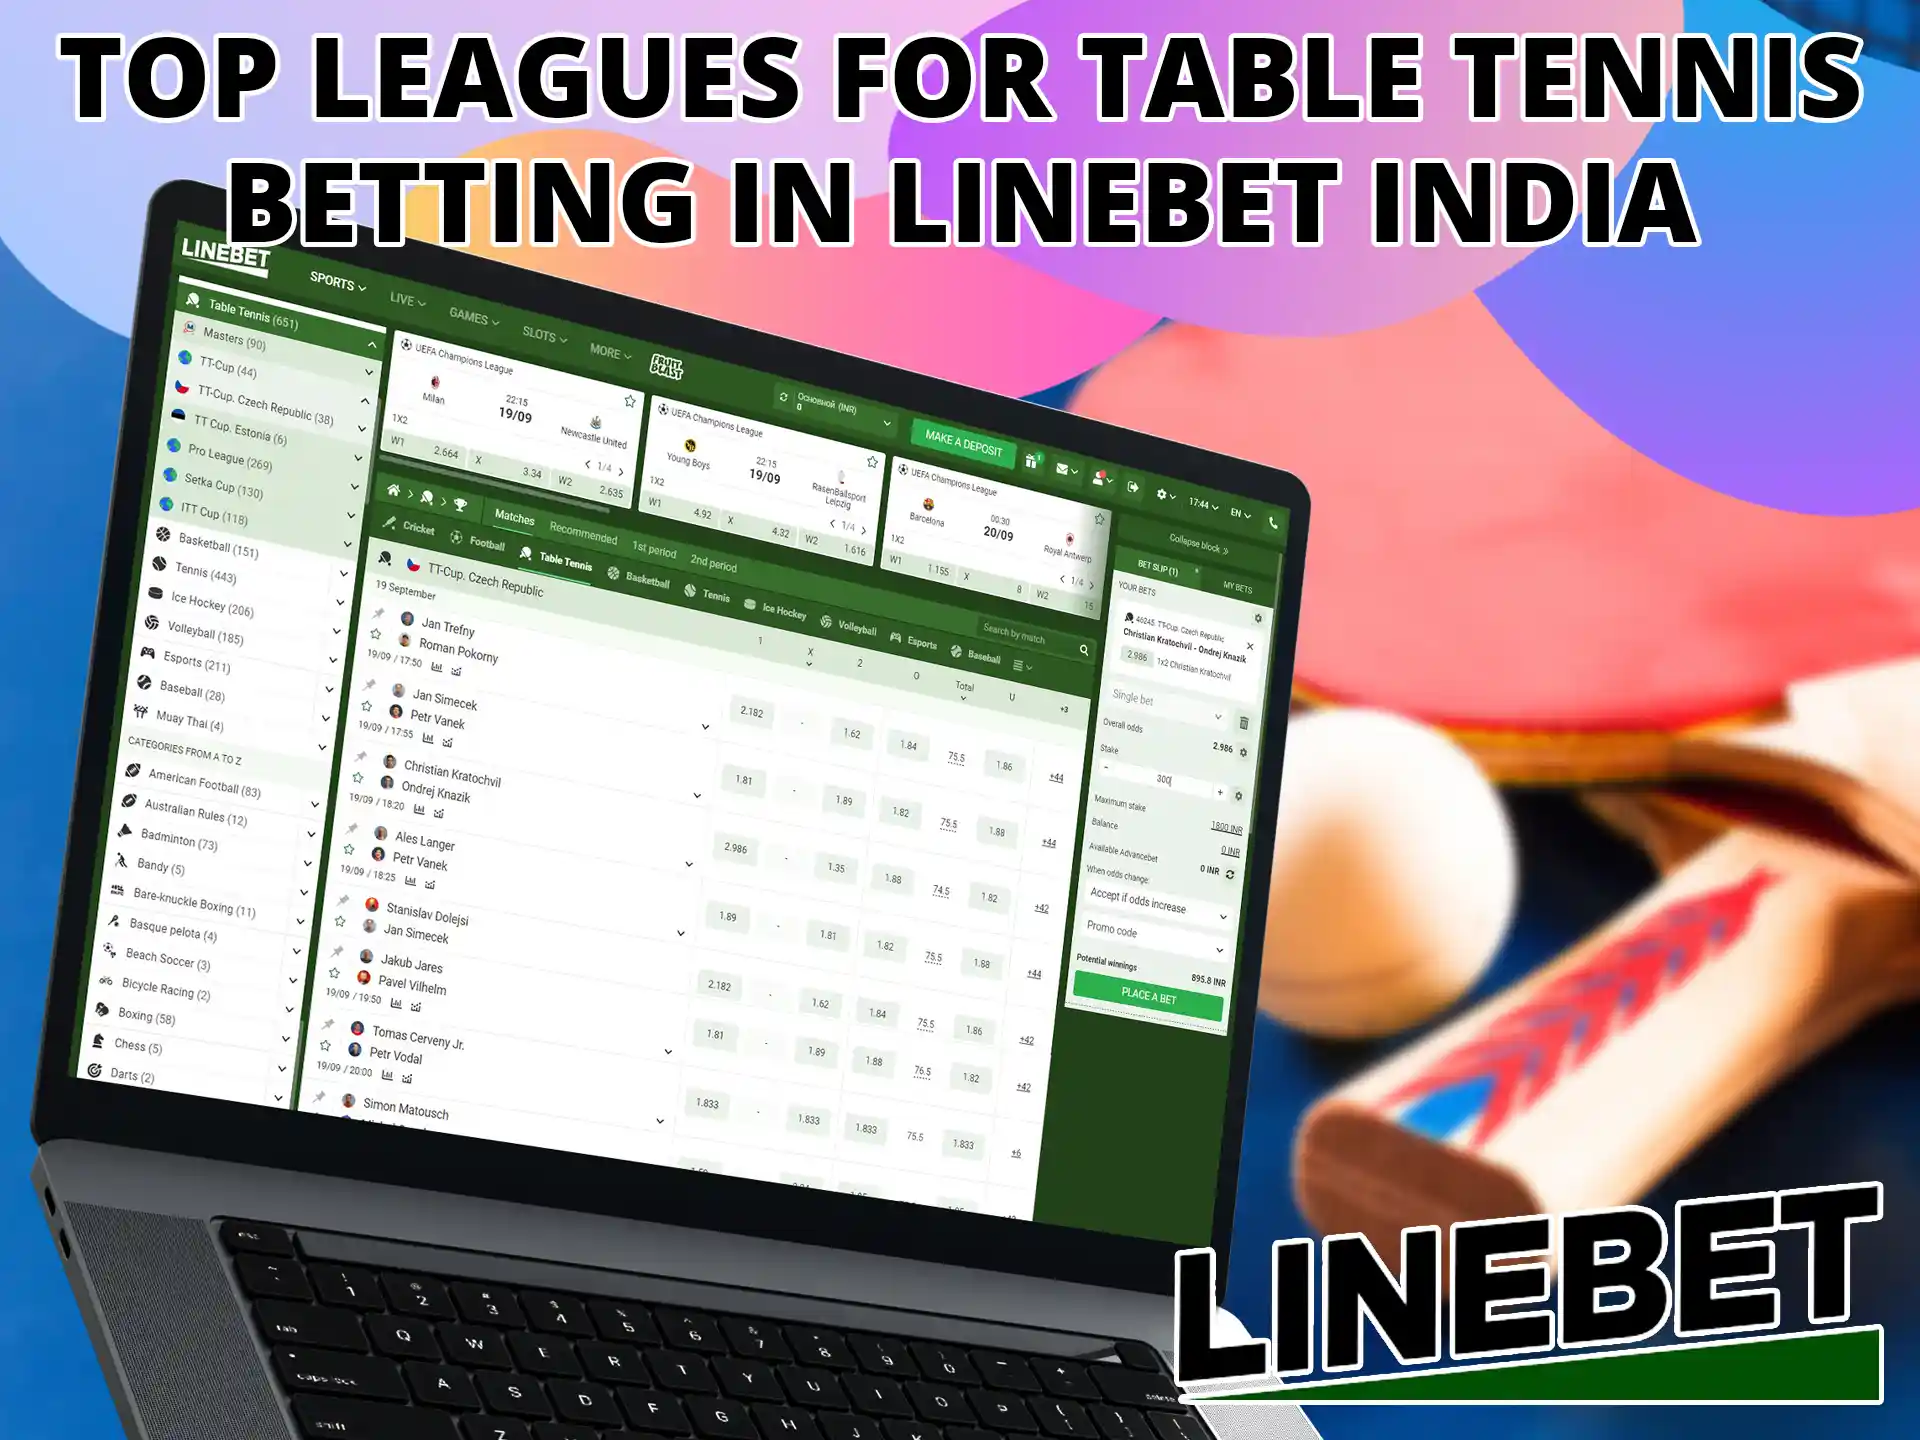 Bet on various table tennis events with competitive odds.